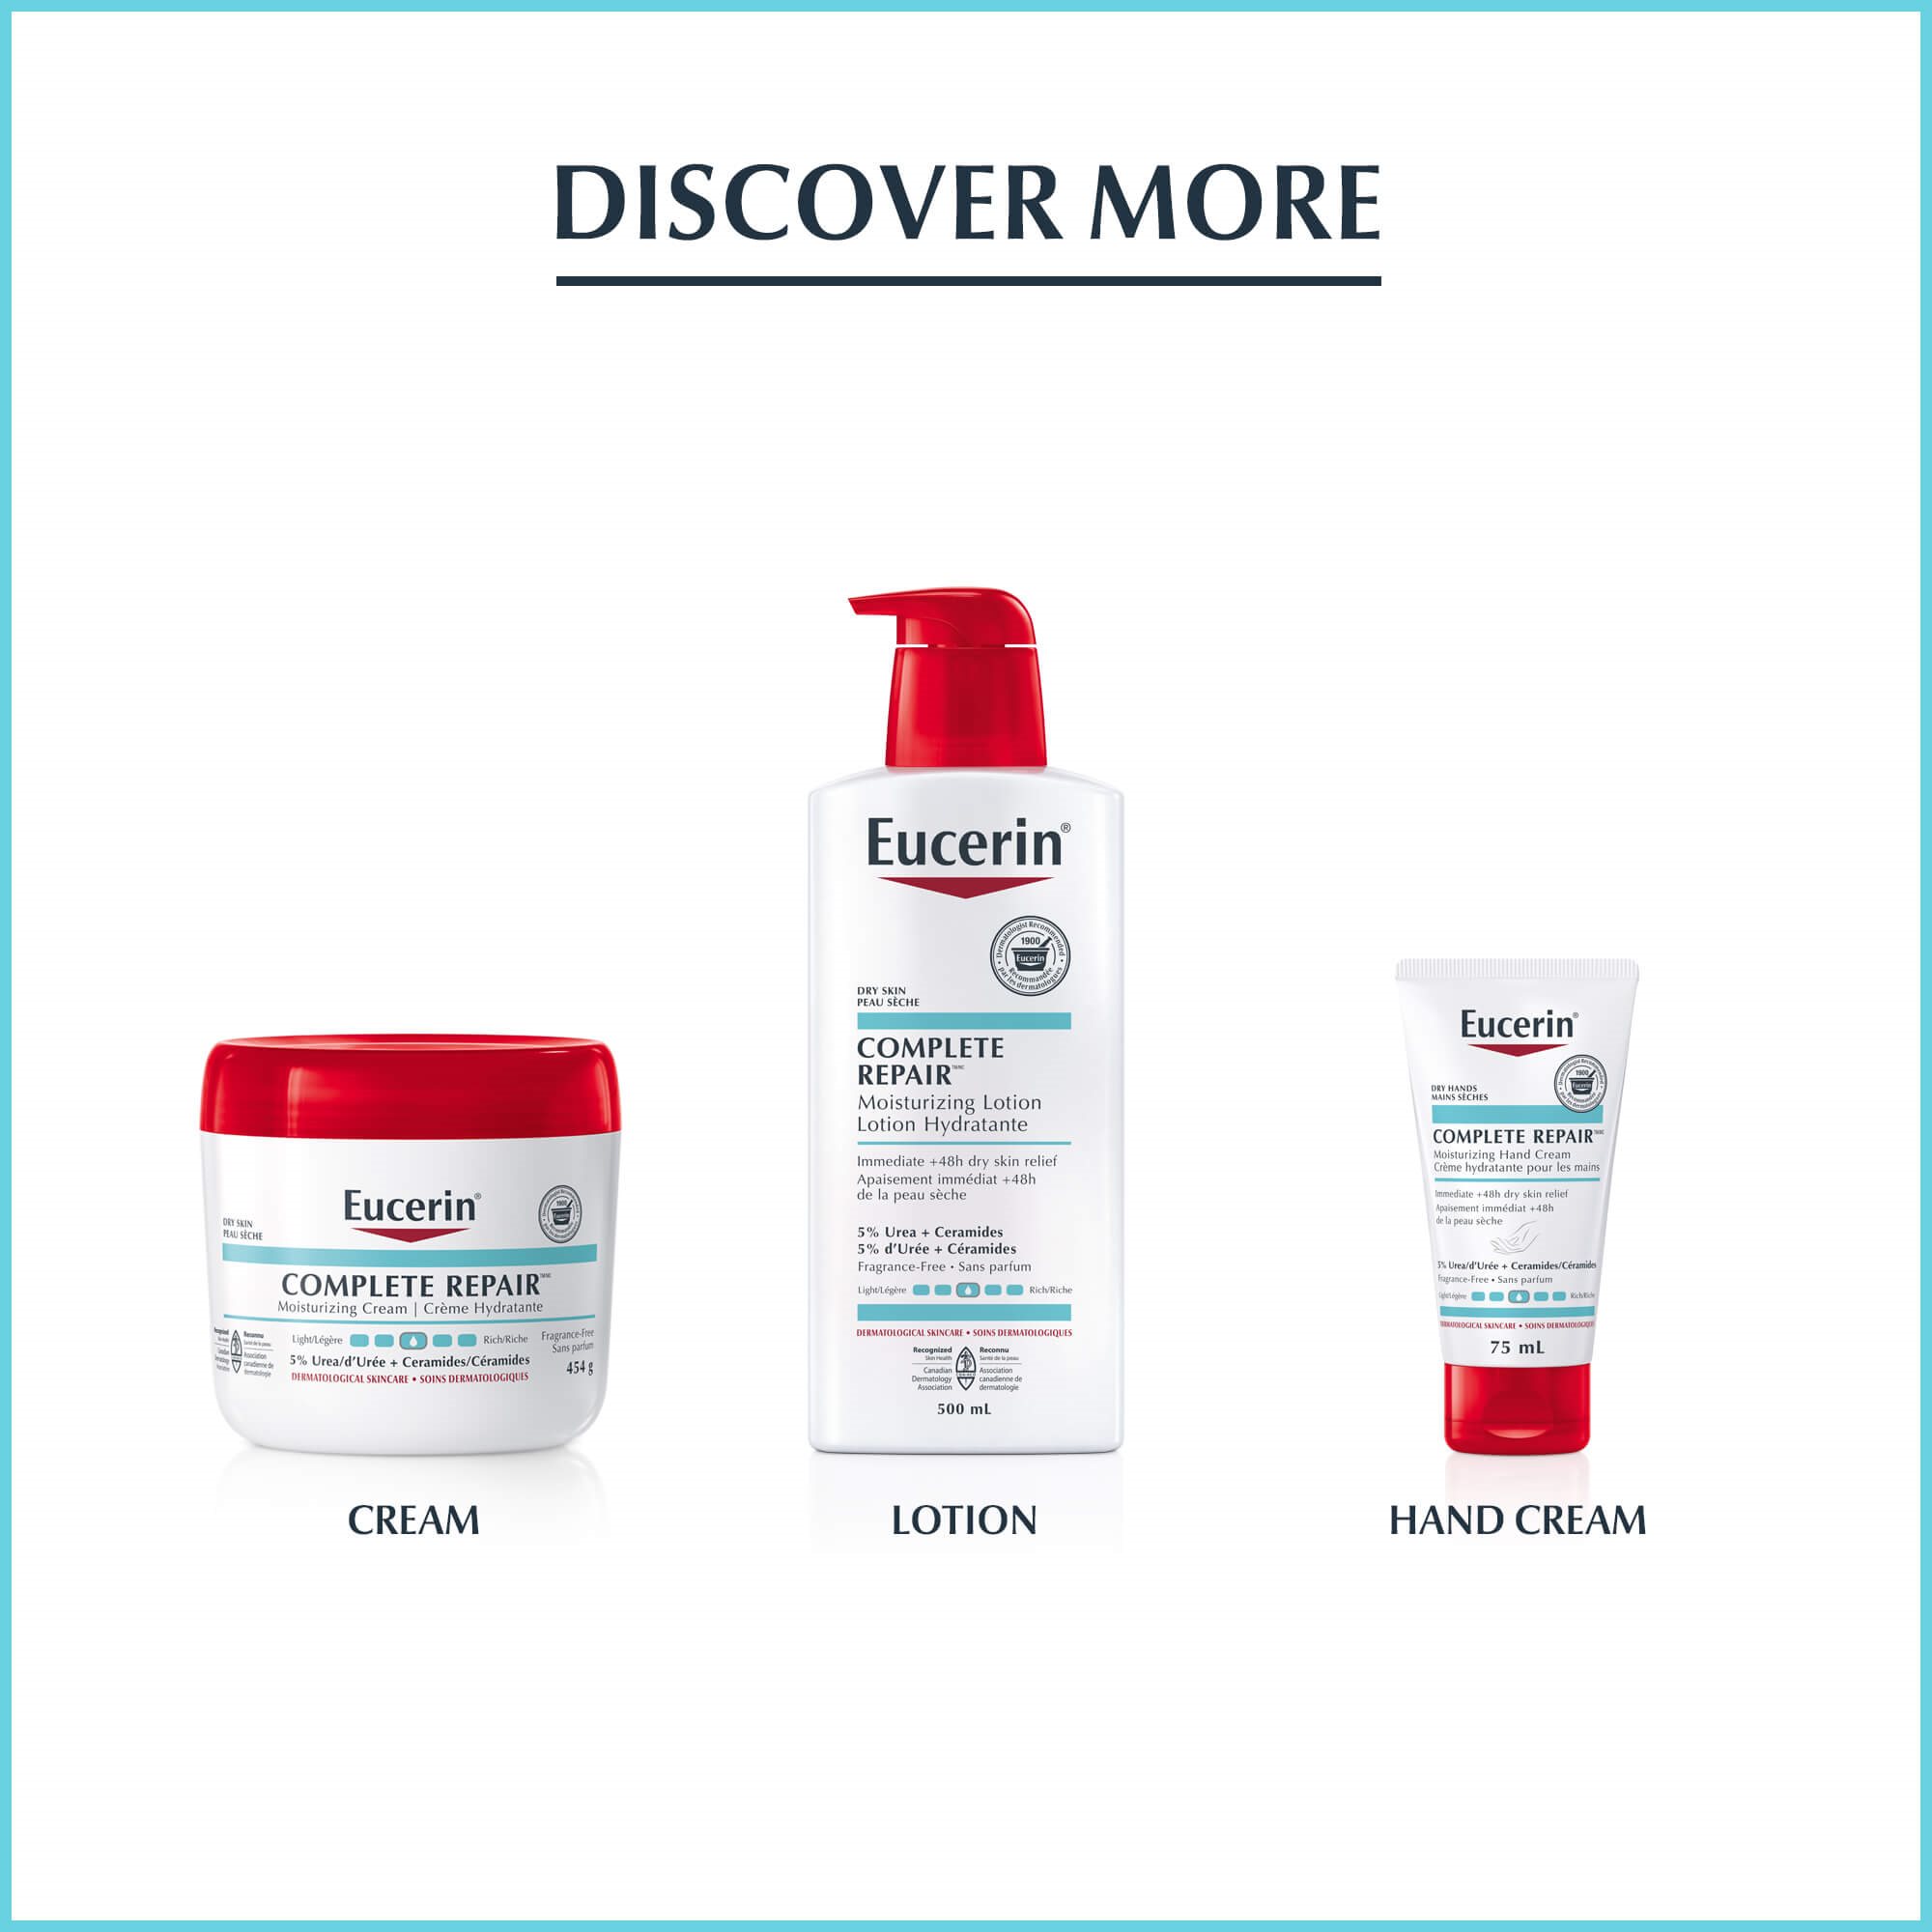 Image of the Eucerin cream, lotion and hand cream from the Complete Repair line.